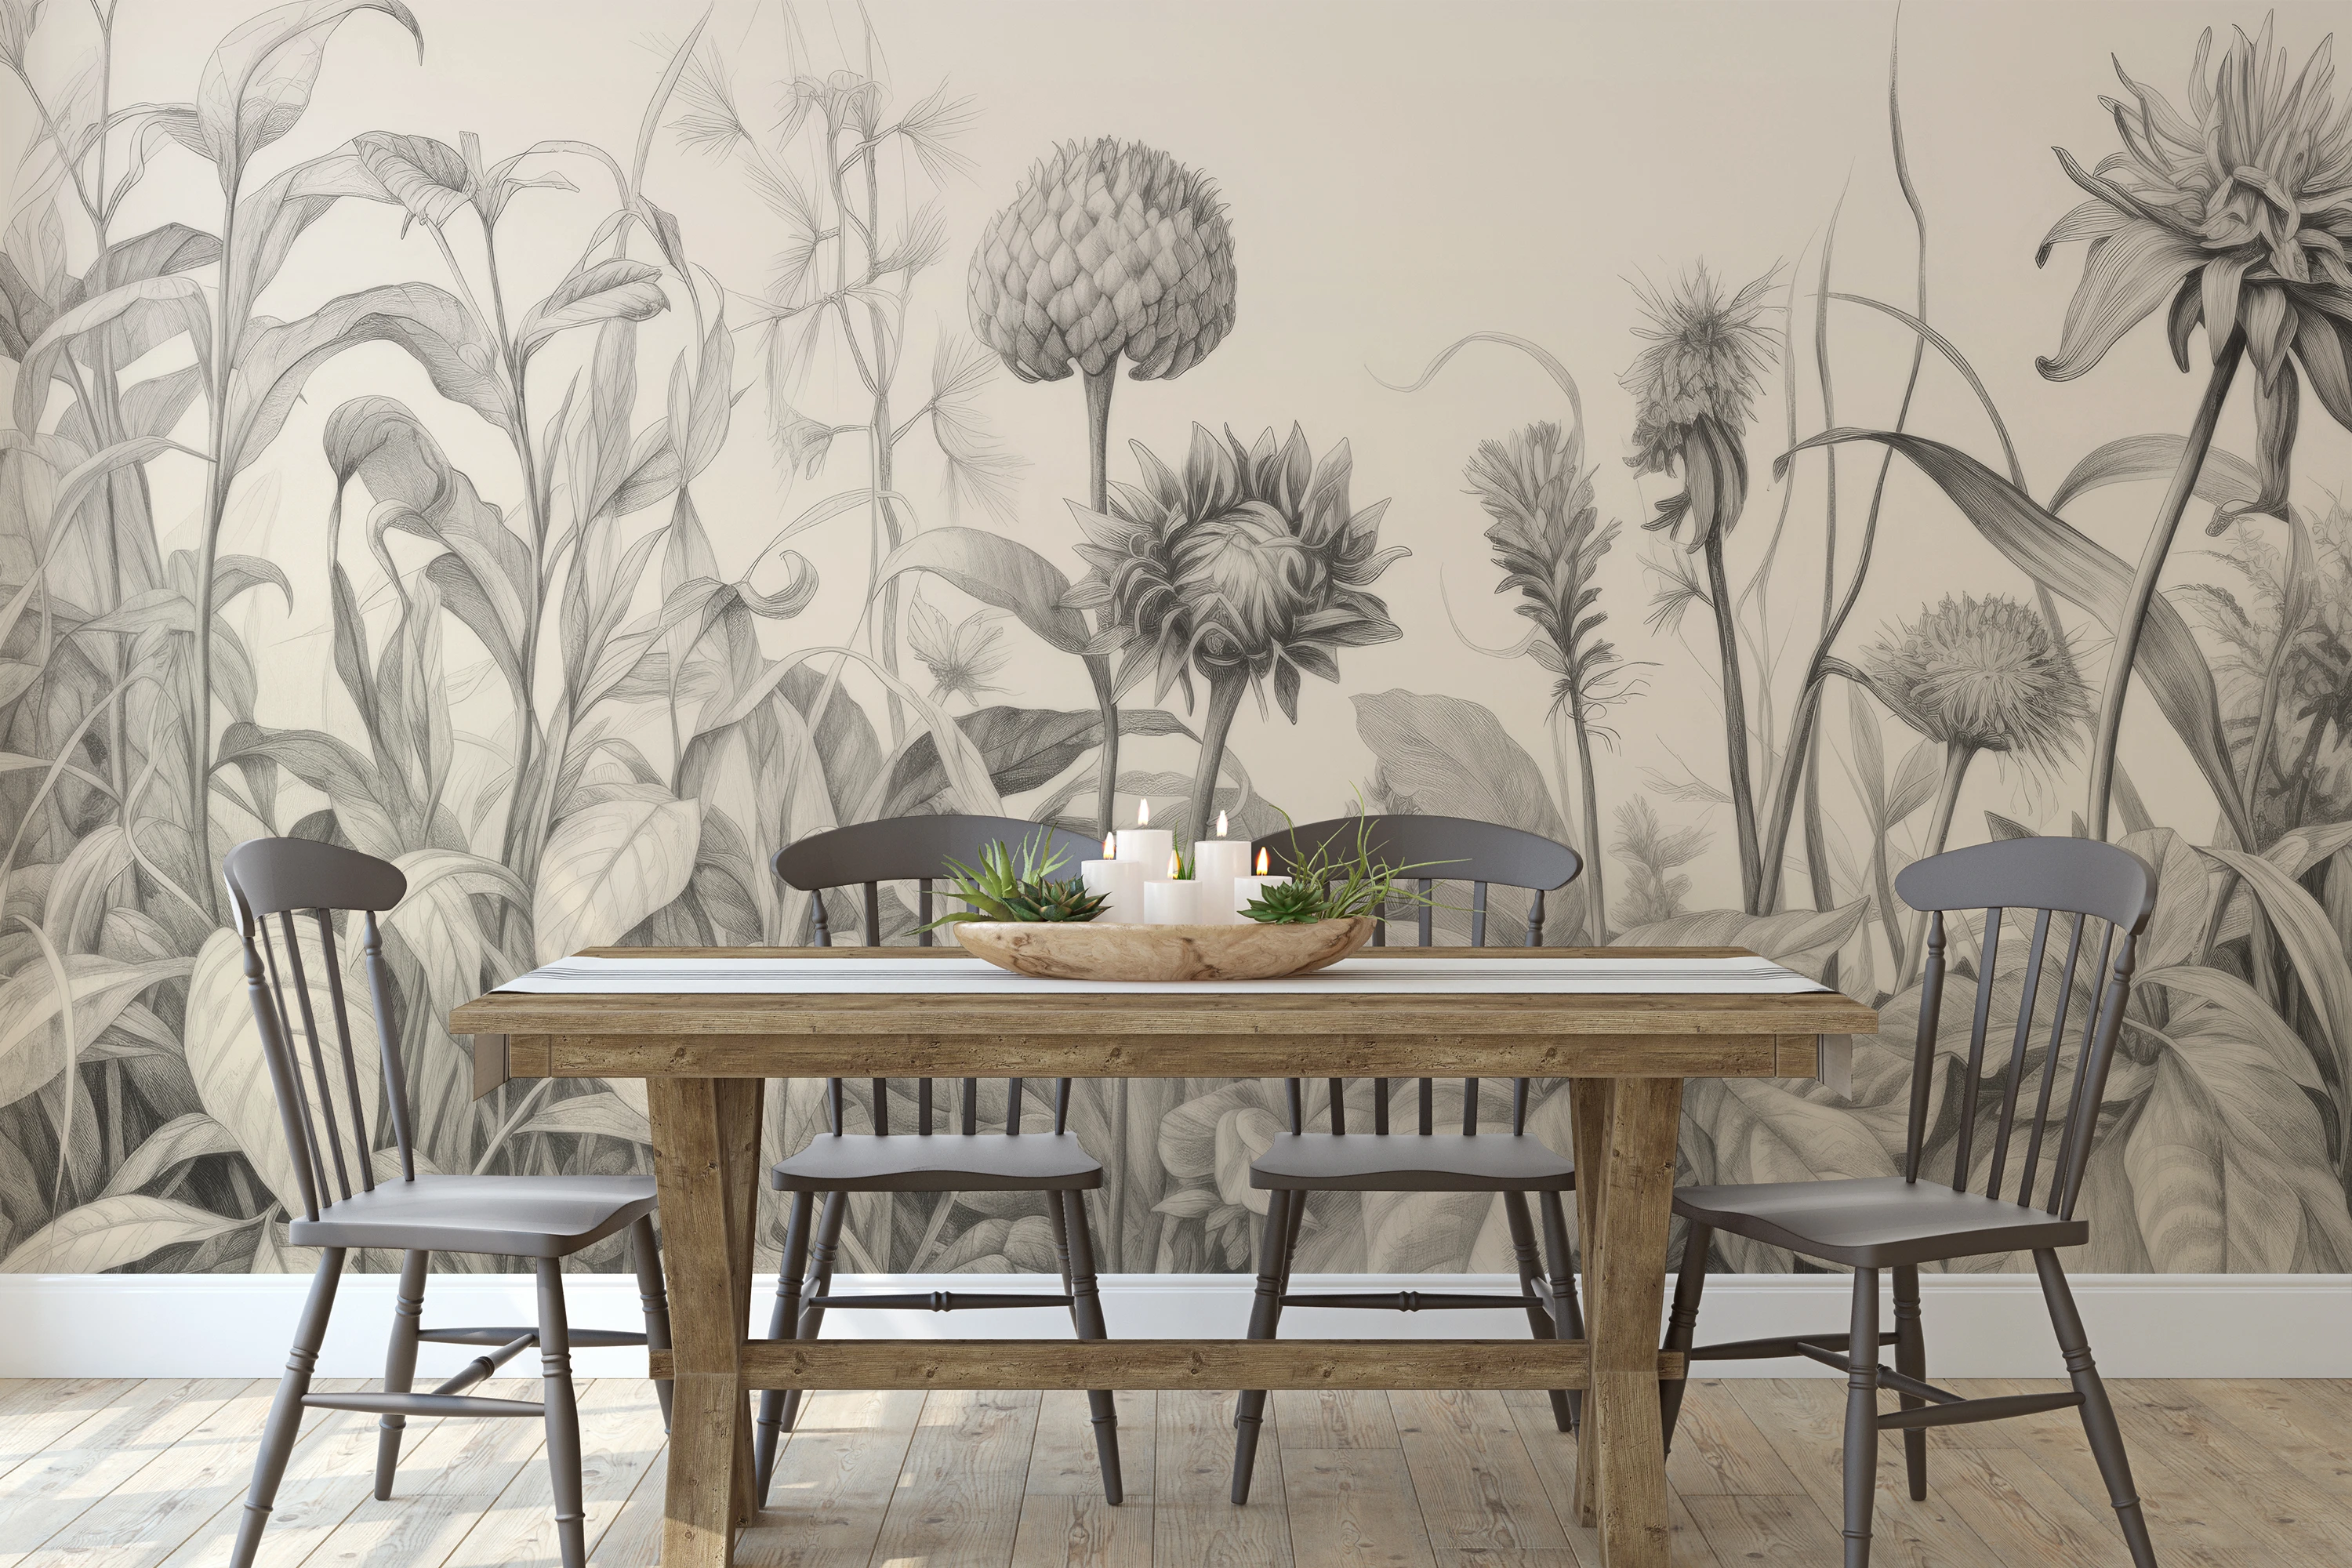 One of the Decomura photo wallpaper patterns from the "Graphite Garden" collection